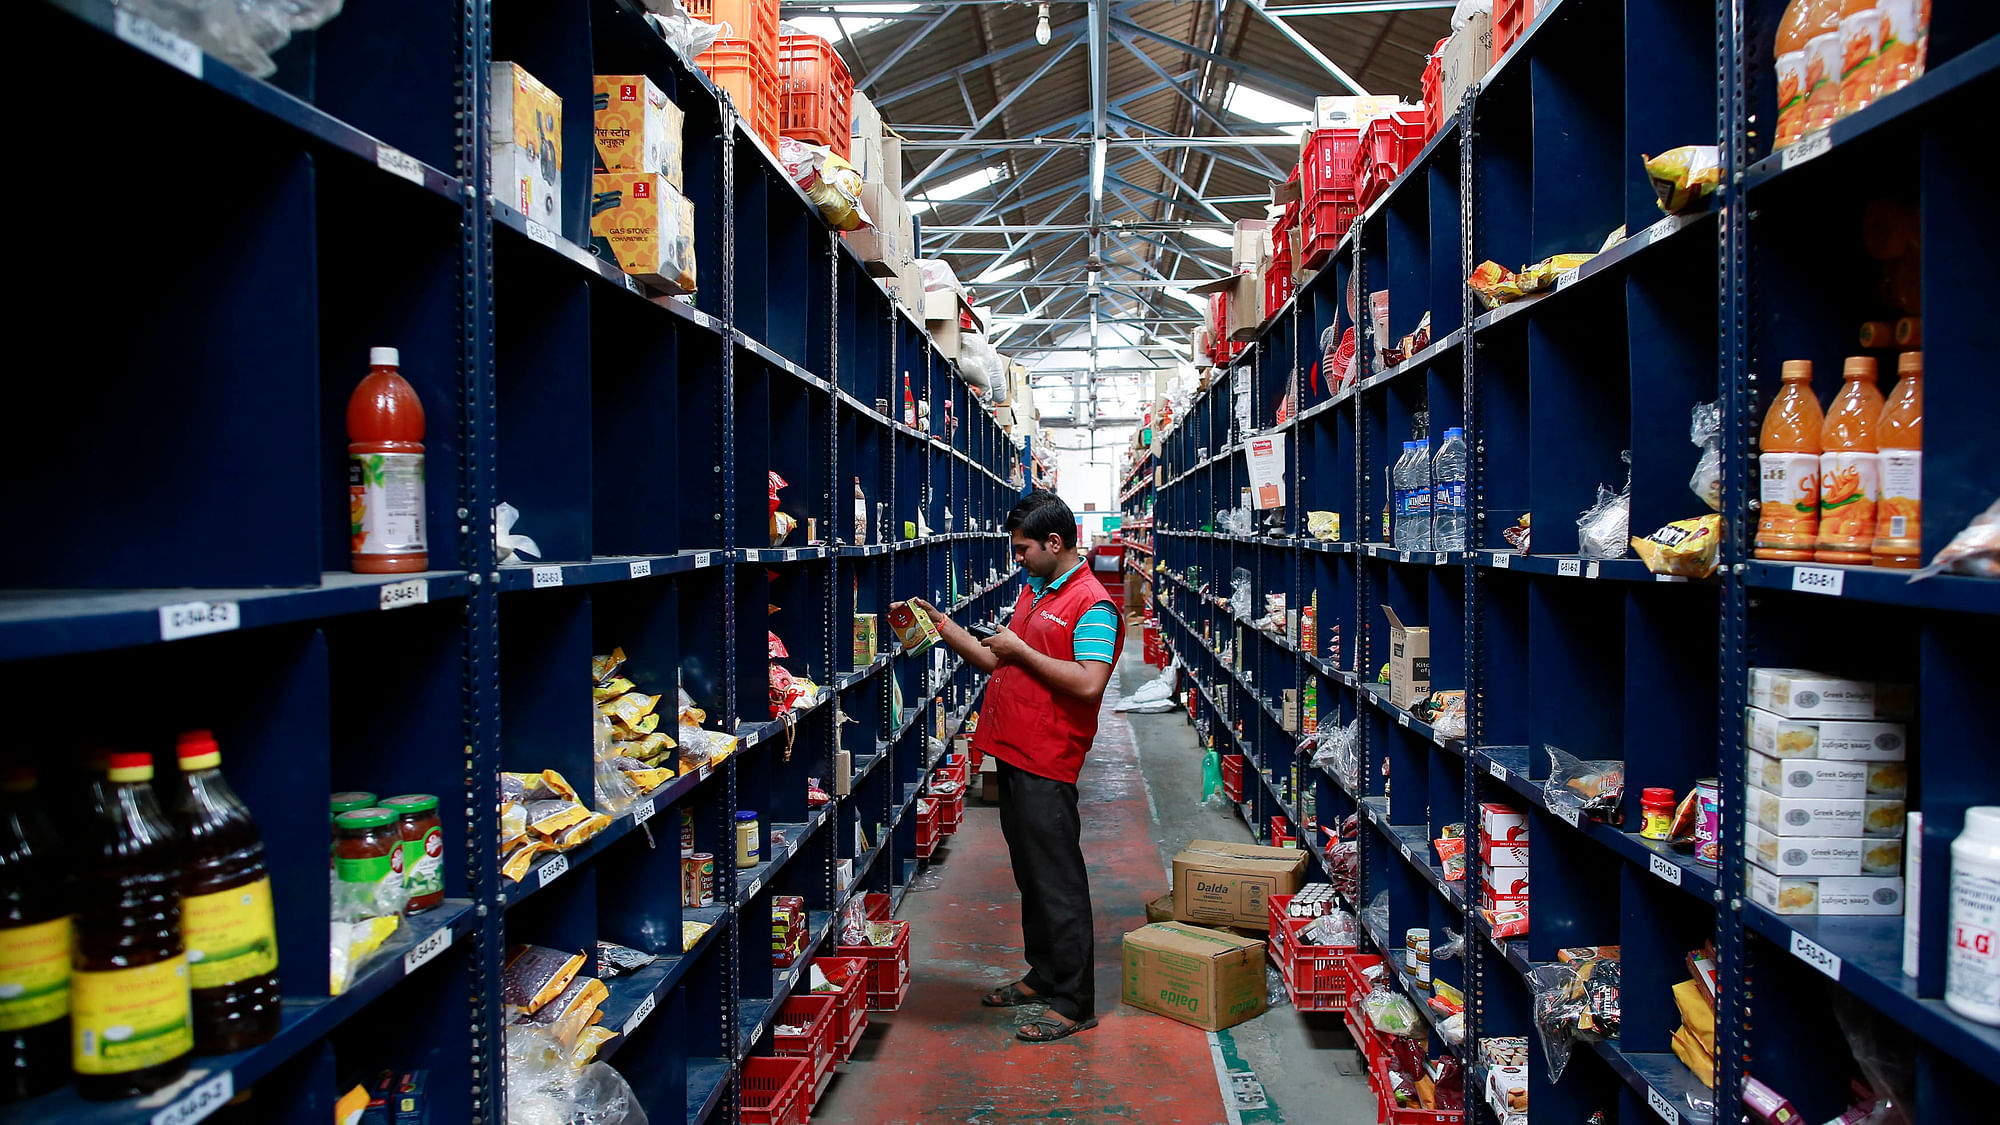 An employee scans a package for an order at a Big Basket (an online groceries firm) warehouse on the outskirts of Mumbai.